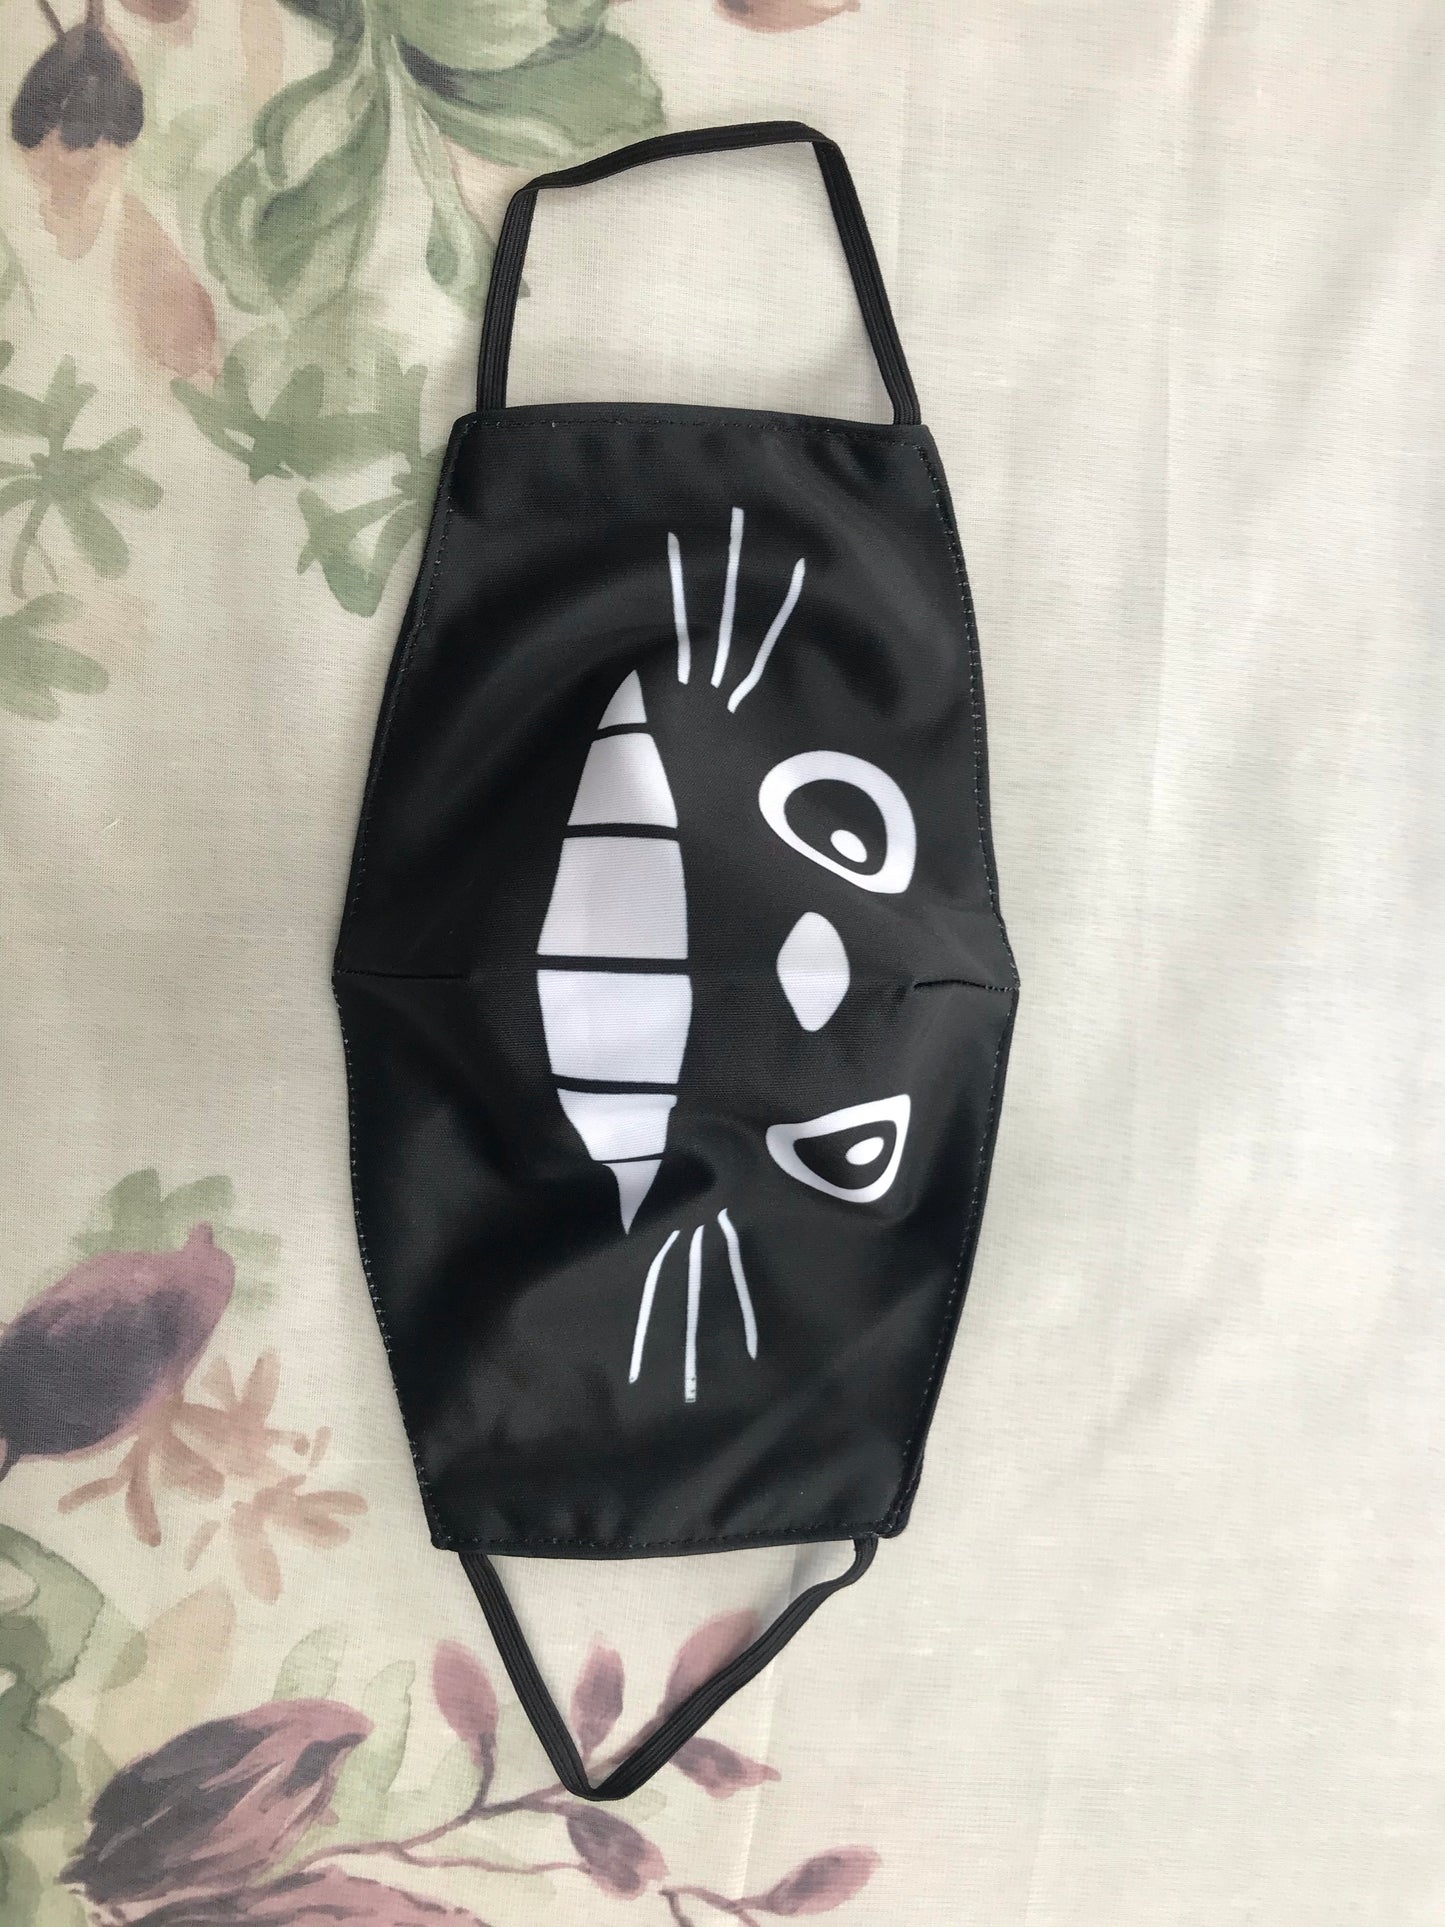 Totoro face mask